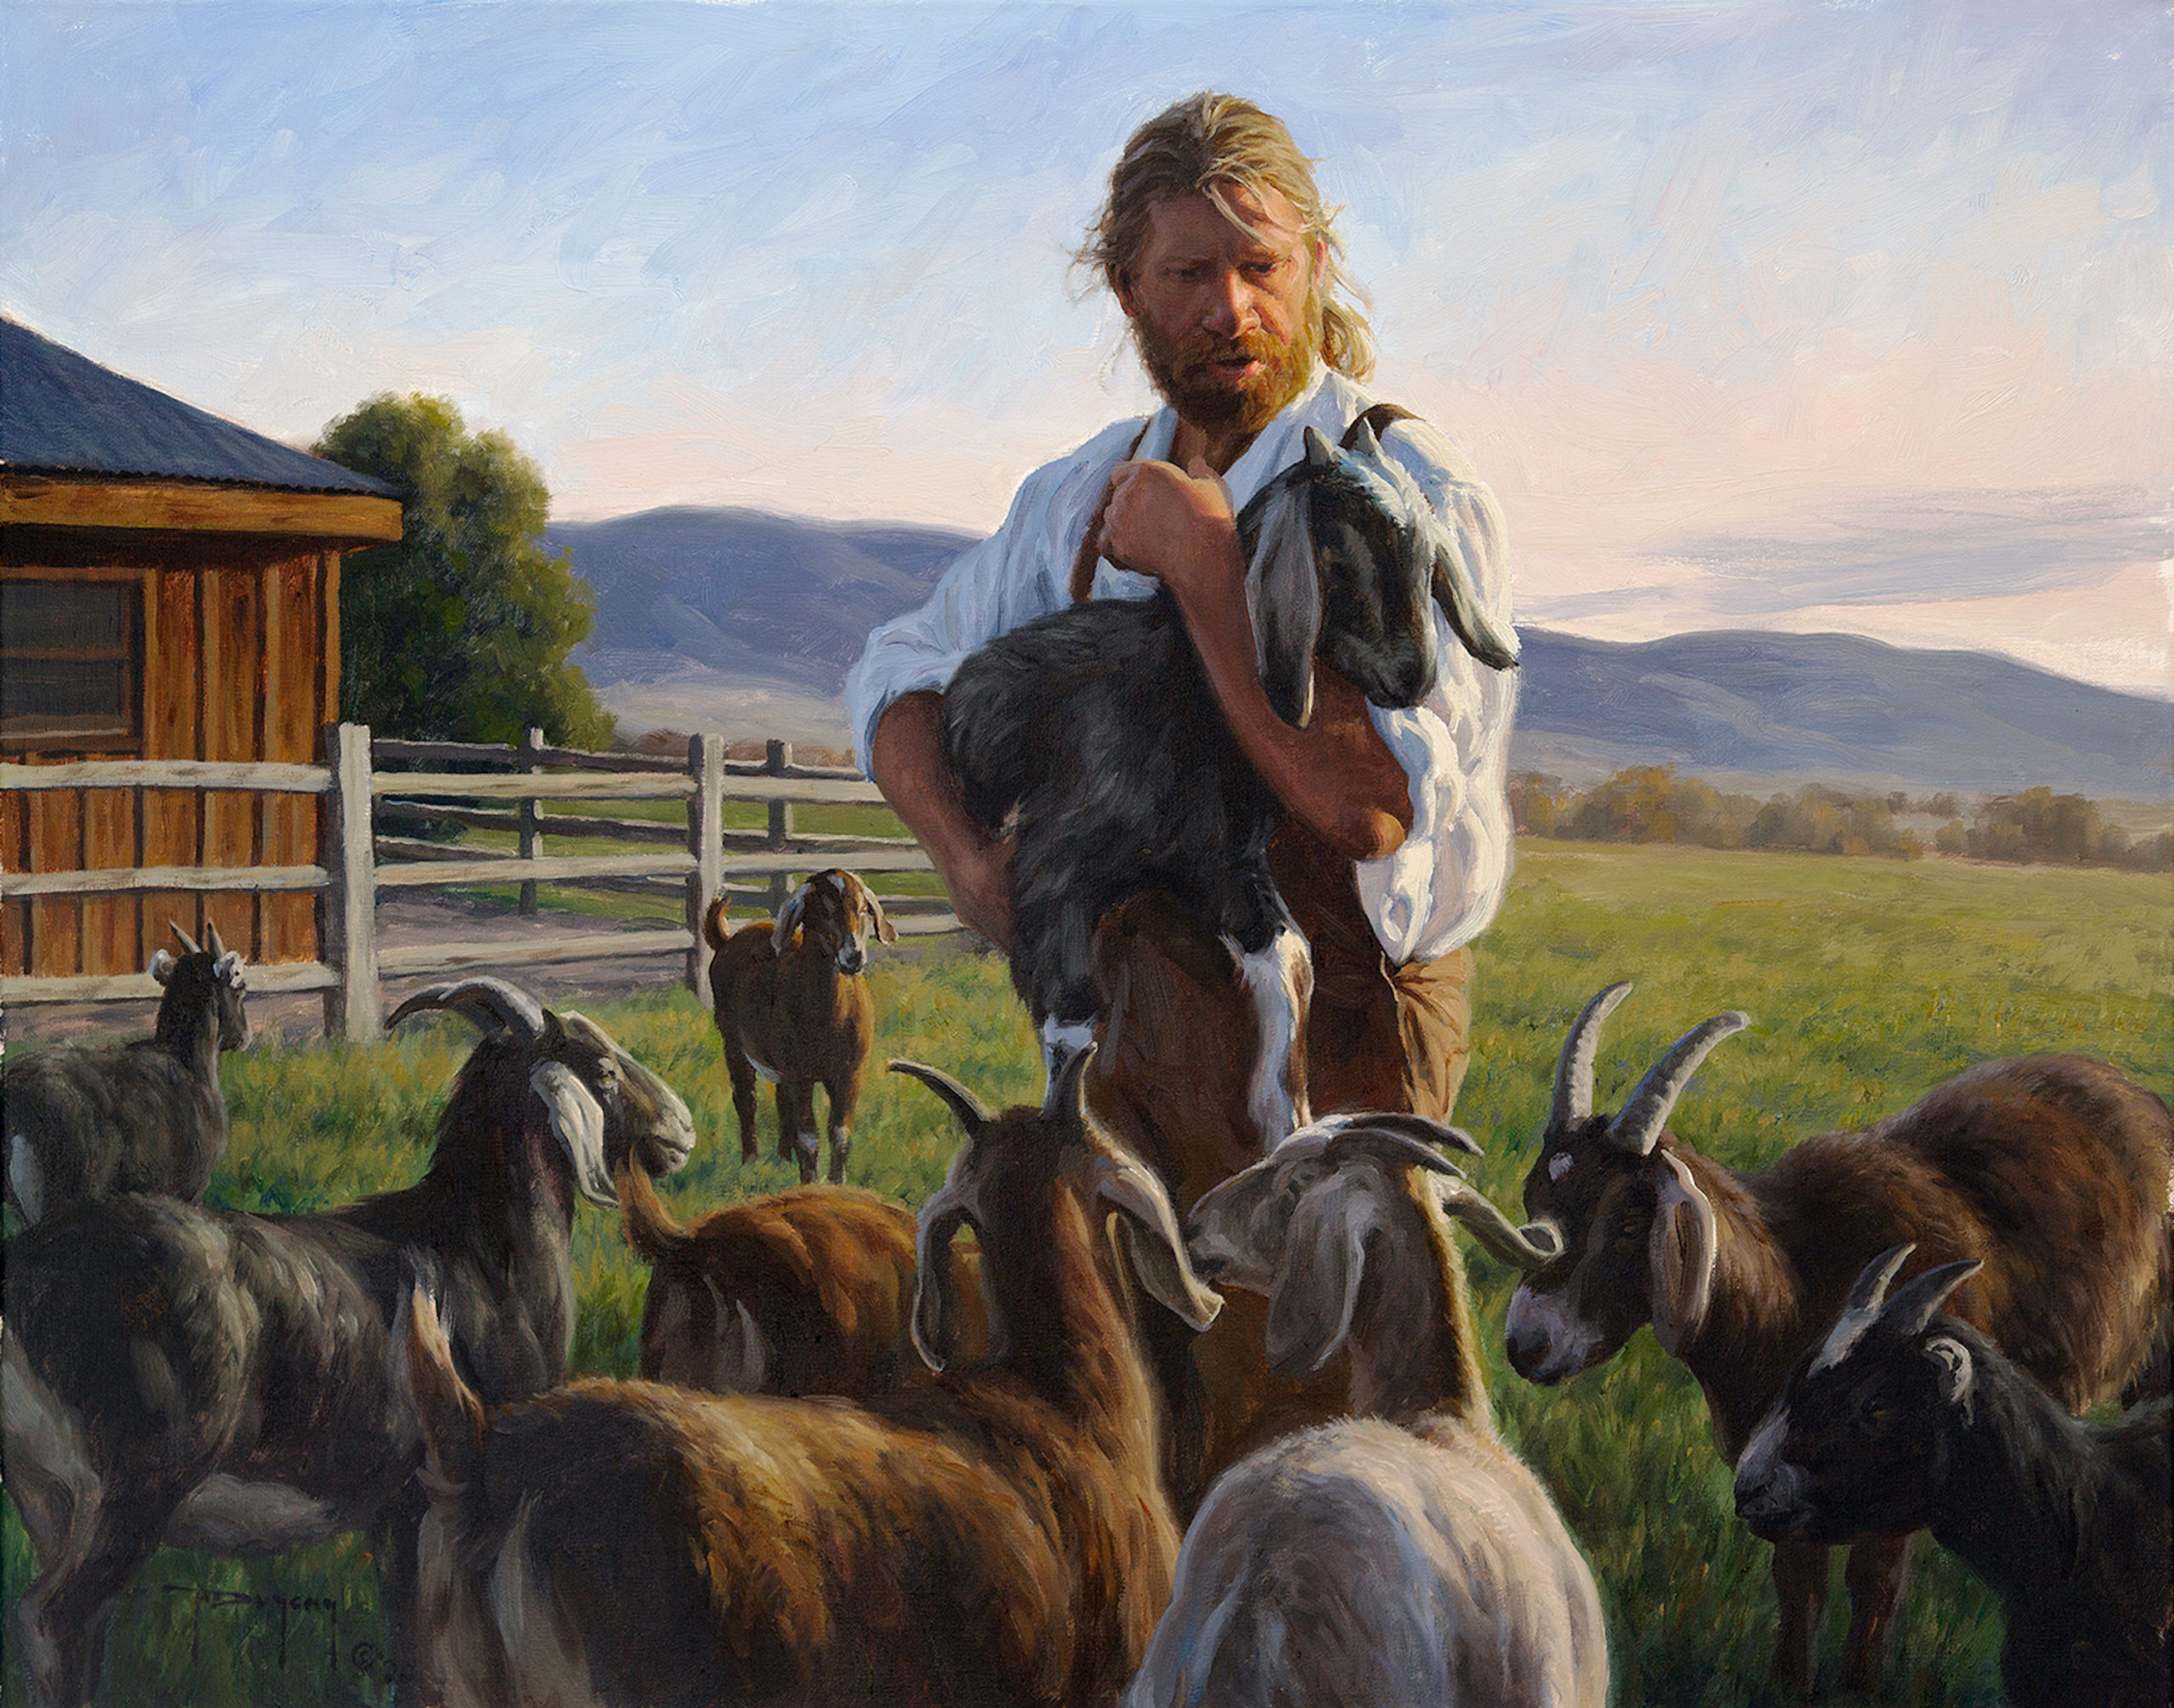 The Herdsman by Robert Duncan, Oil on Canvas, 22 x 28 in.; Trailside Galleries.